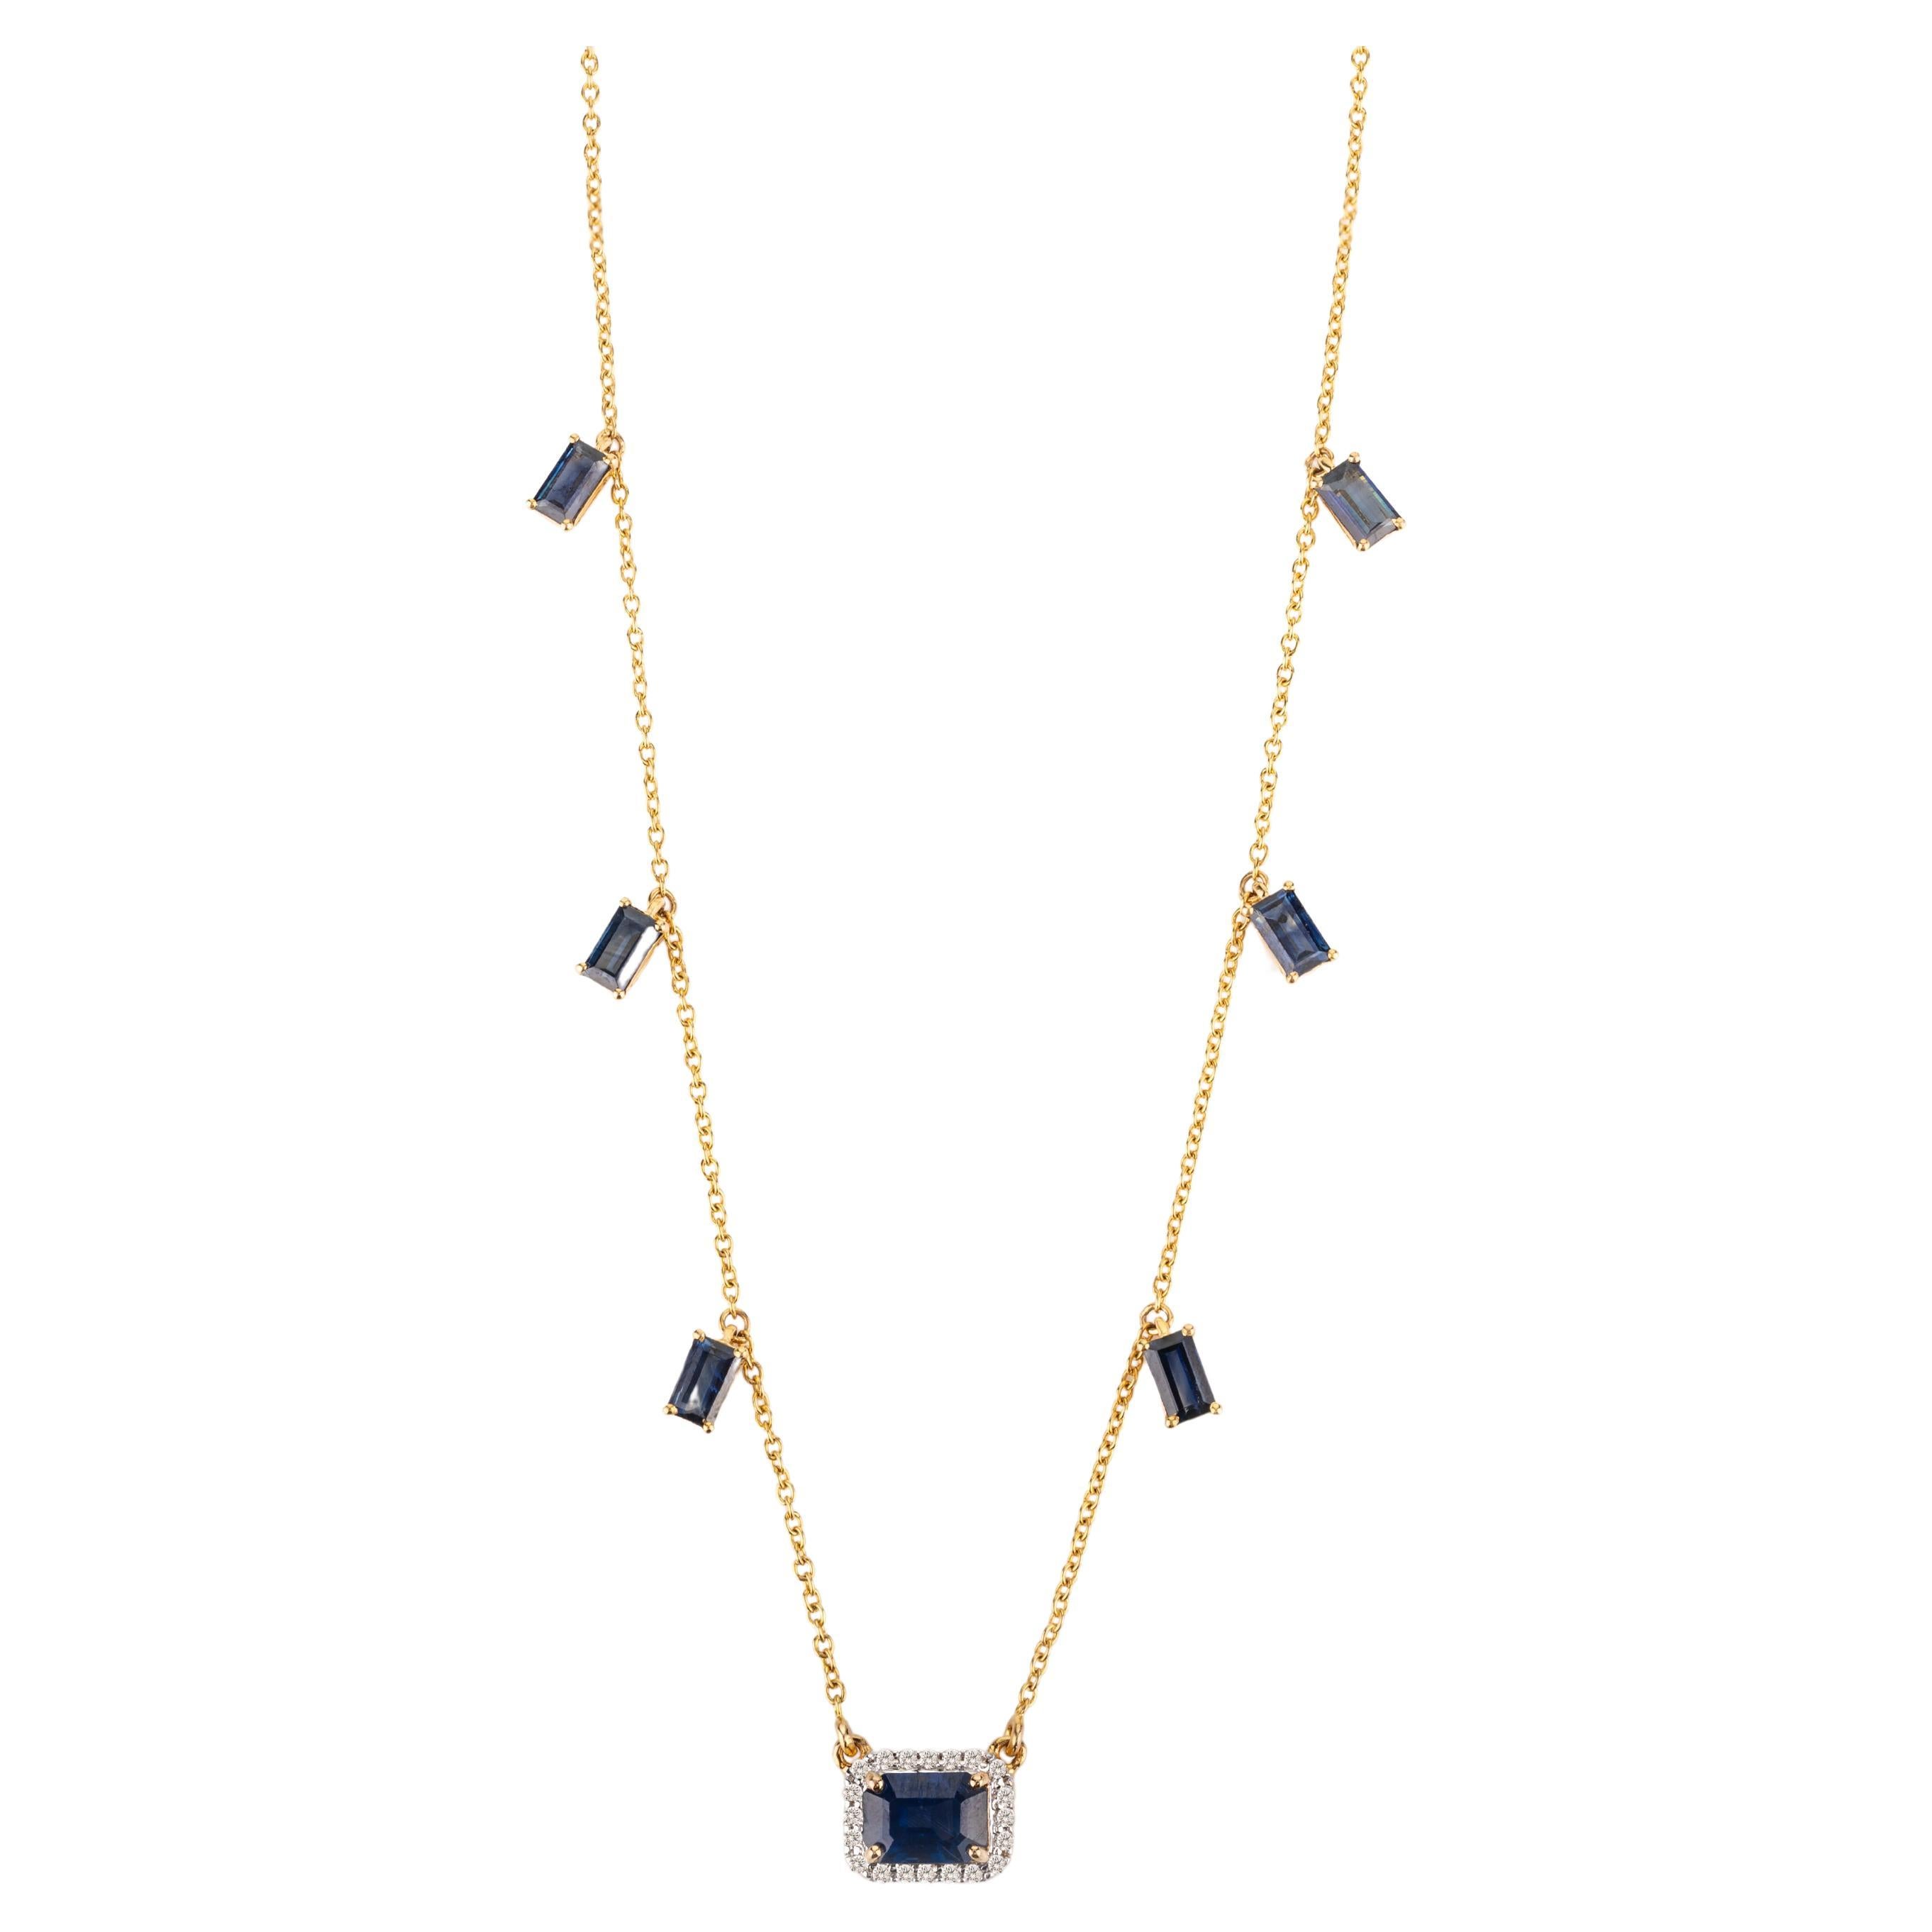 Dangling Blue Sapphire Diamond 14k Yellow Gold Chain Necklace Gift for Her For Sale